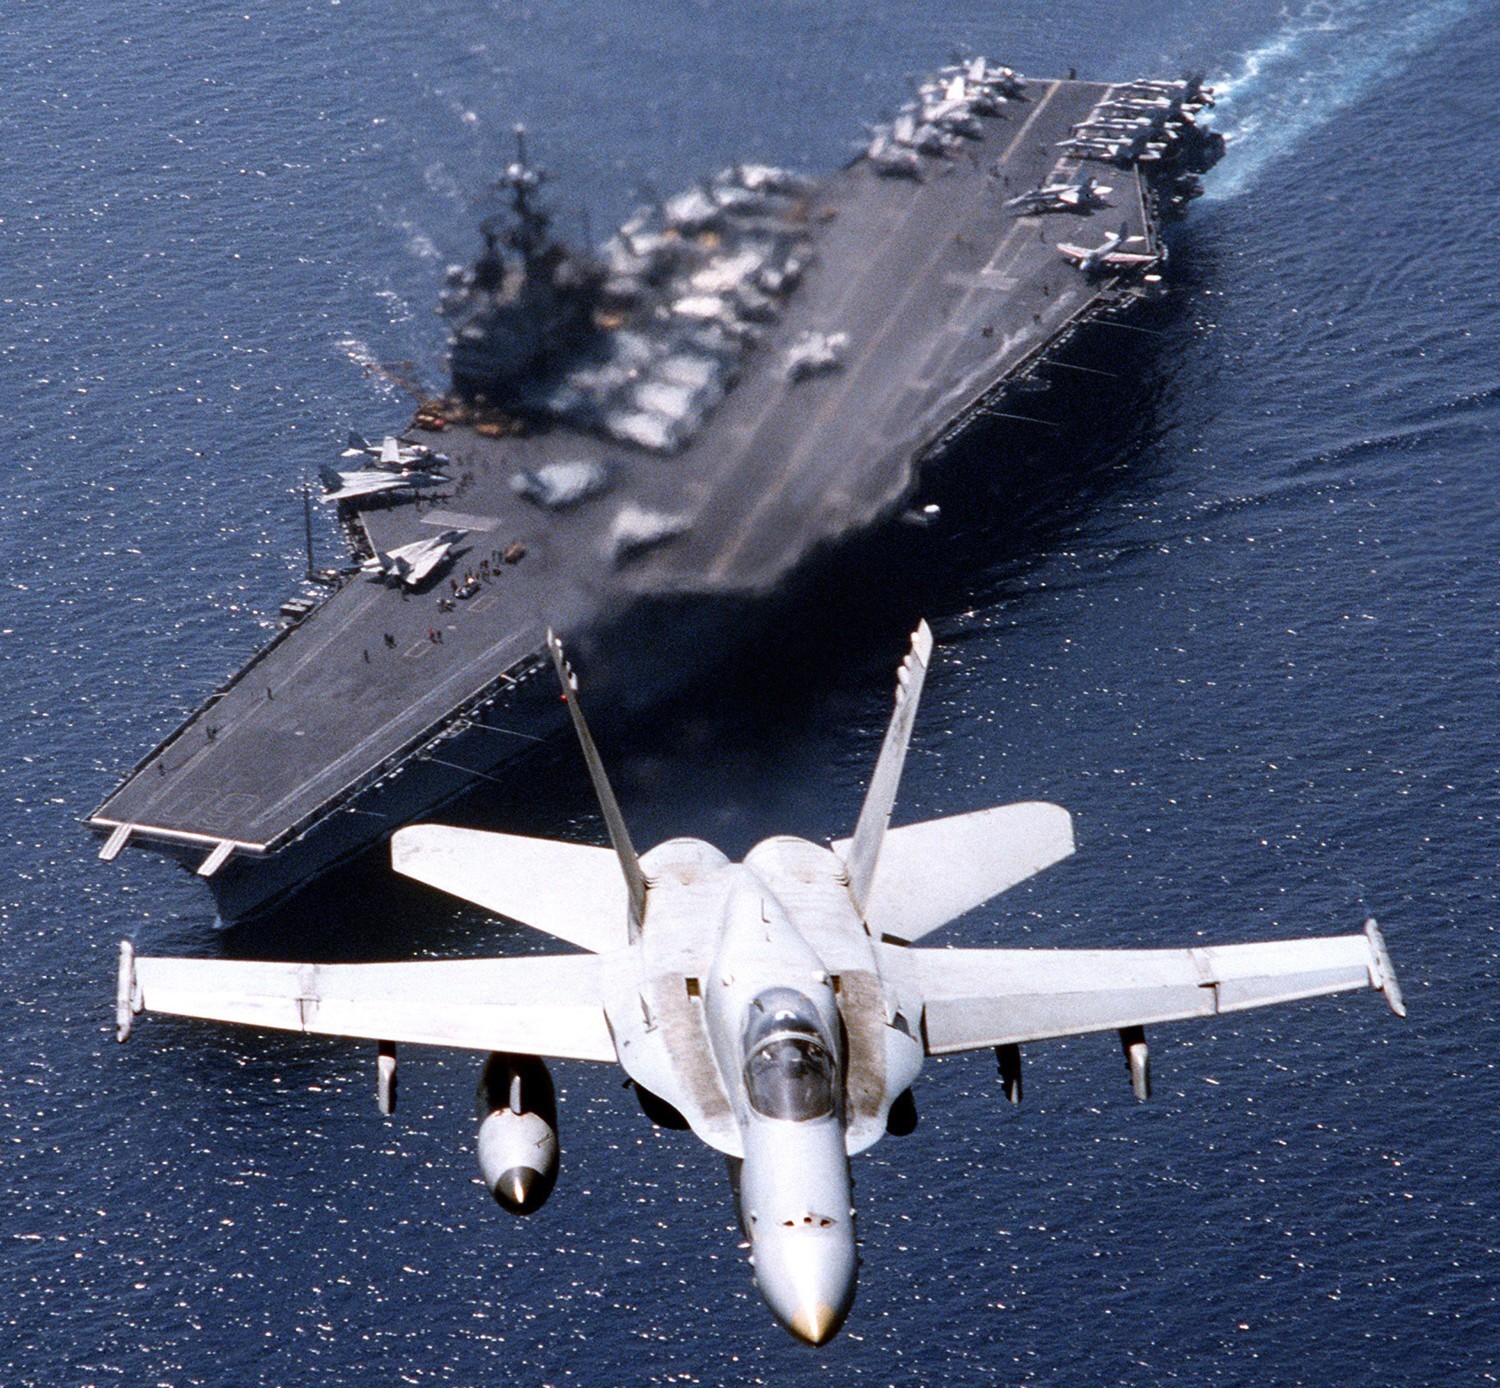 vfa-83 rampagers strike fighter squadron f/a-18c hornet cvw-17 uss saratoga cv-60 161